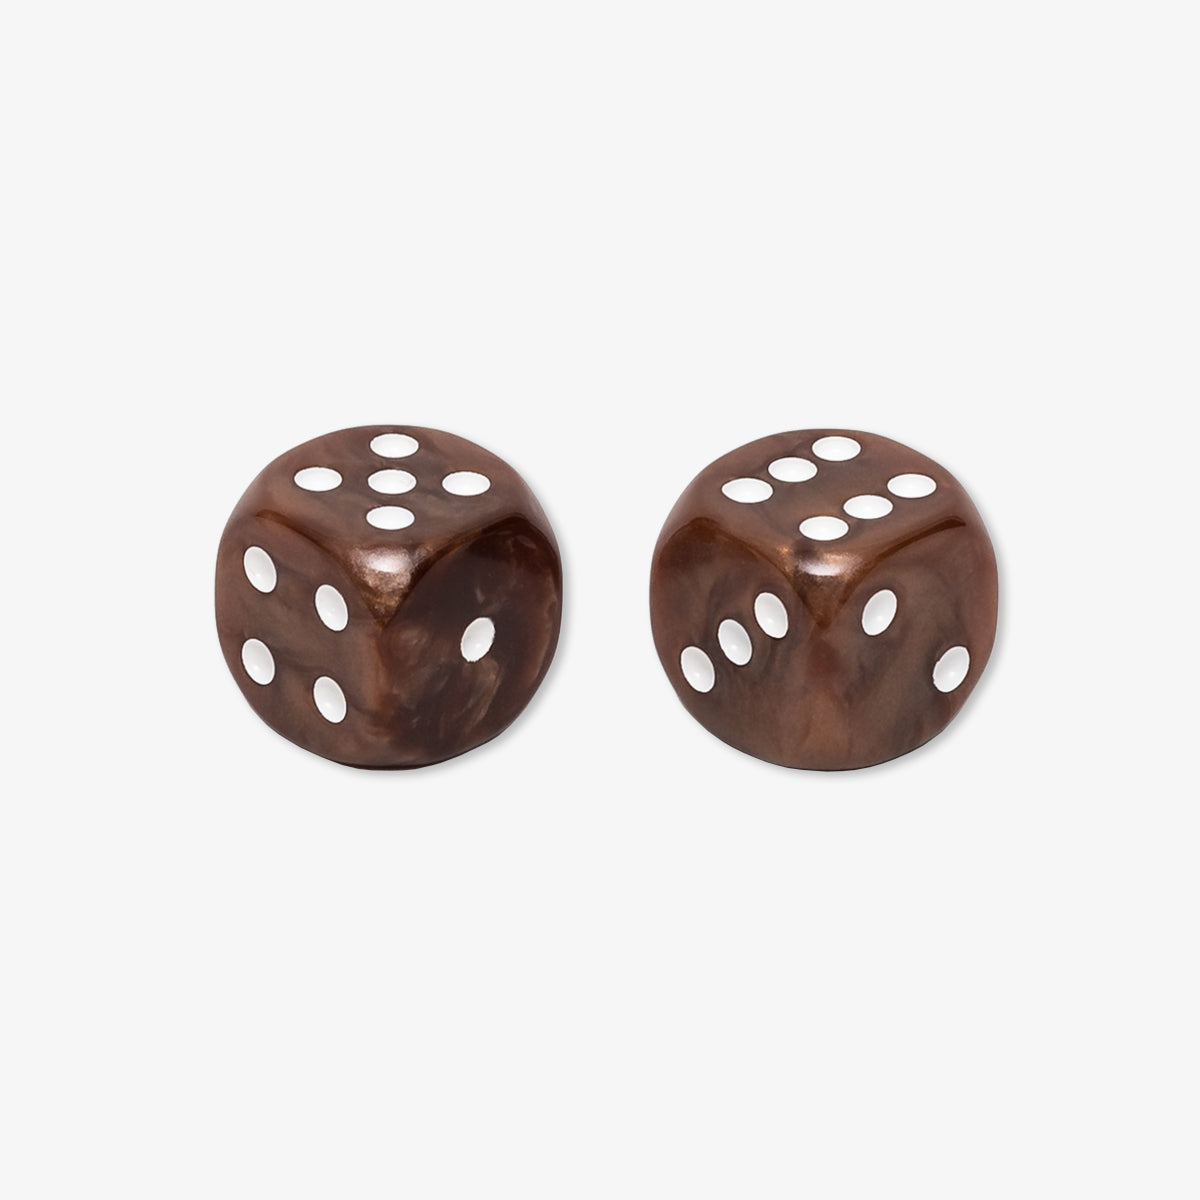 Backgammon Dice Resin Mother-of-Pearl 15 mm Brown